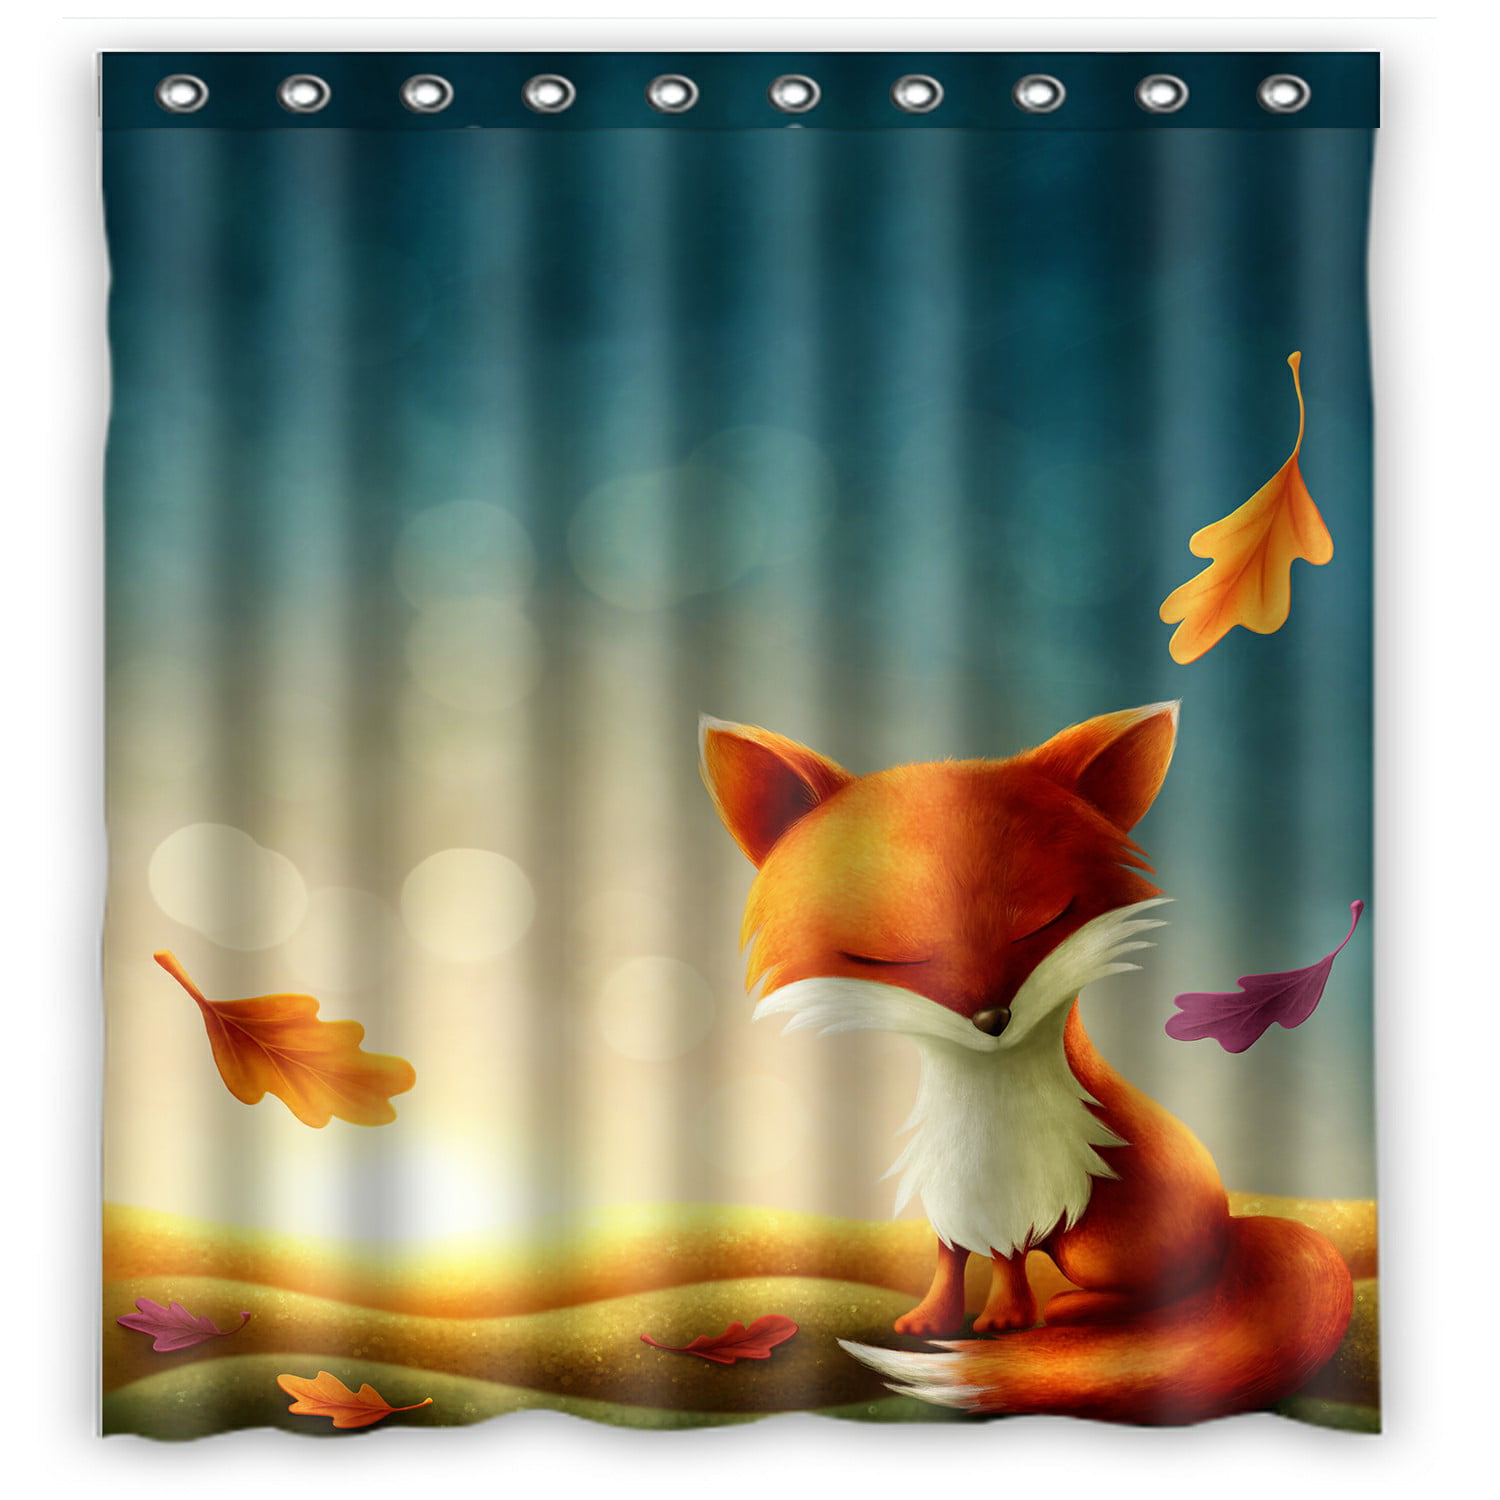 Details about   Fox Shower Curtain Jumping Fox Wild Woodland Print for Bathroom 